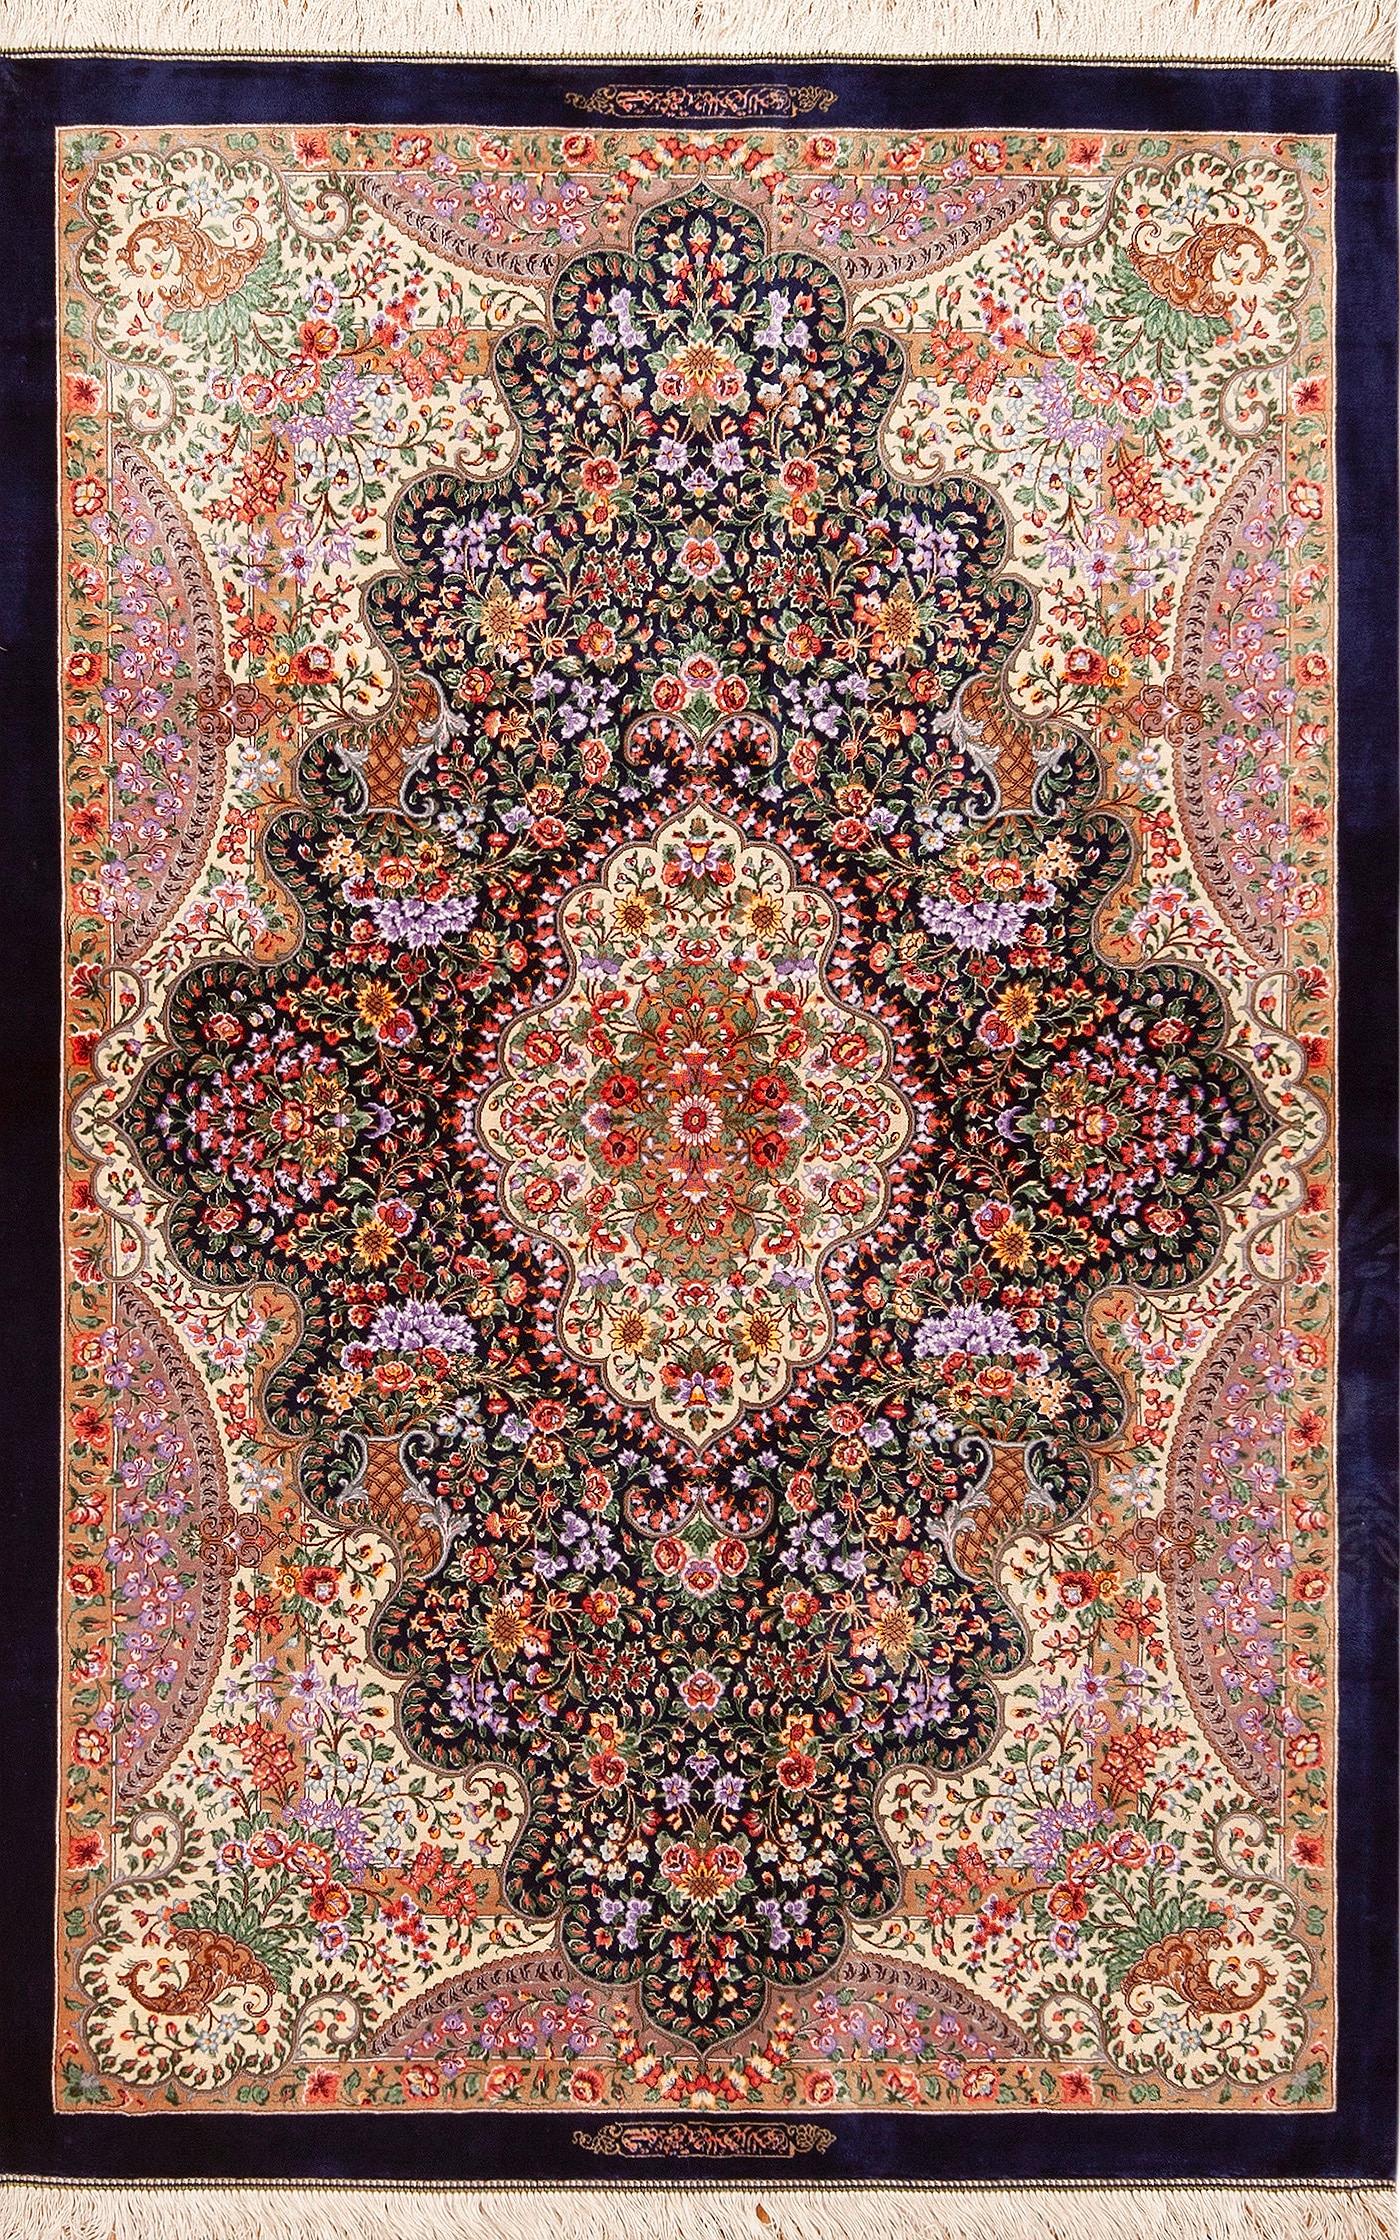 Luxurious Fine Small Size Vintage Floral Persian Silk Qum Rug 3'6